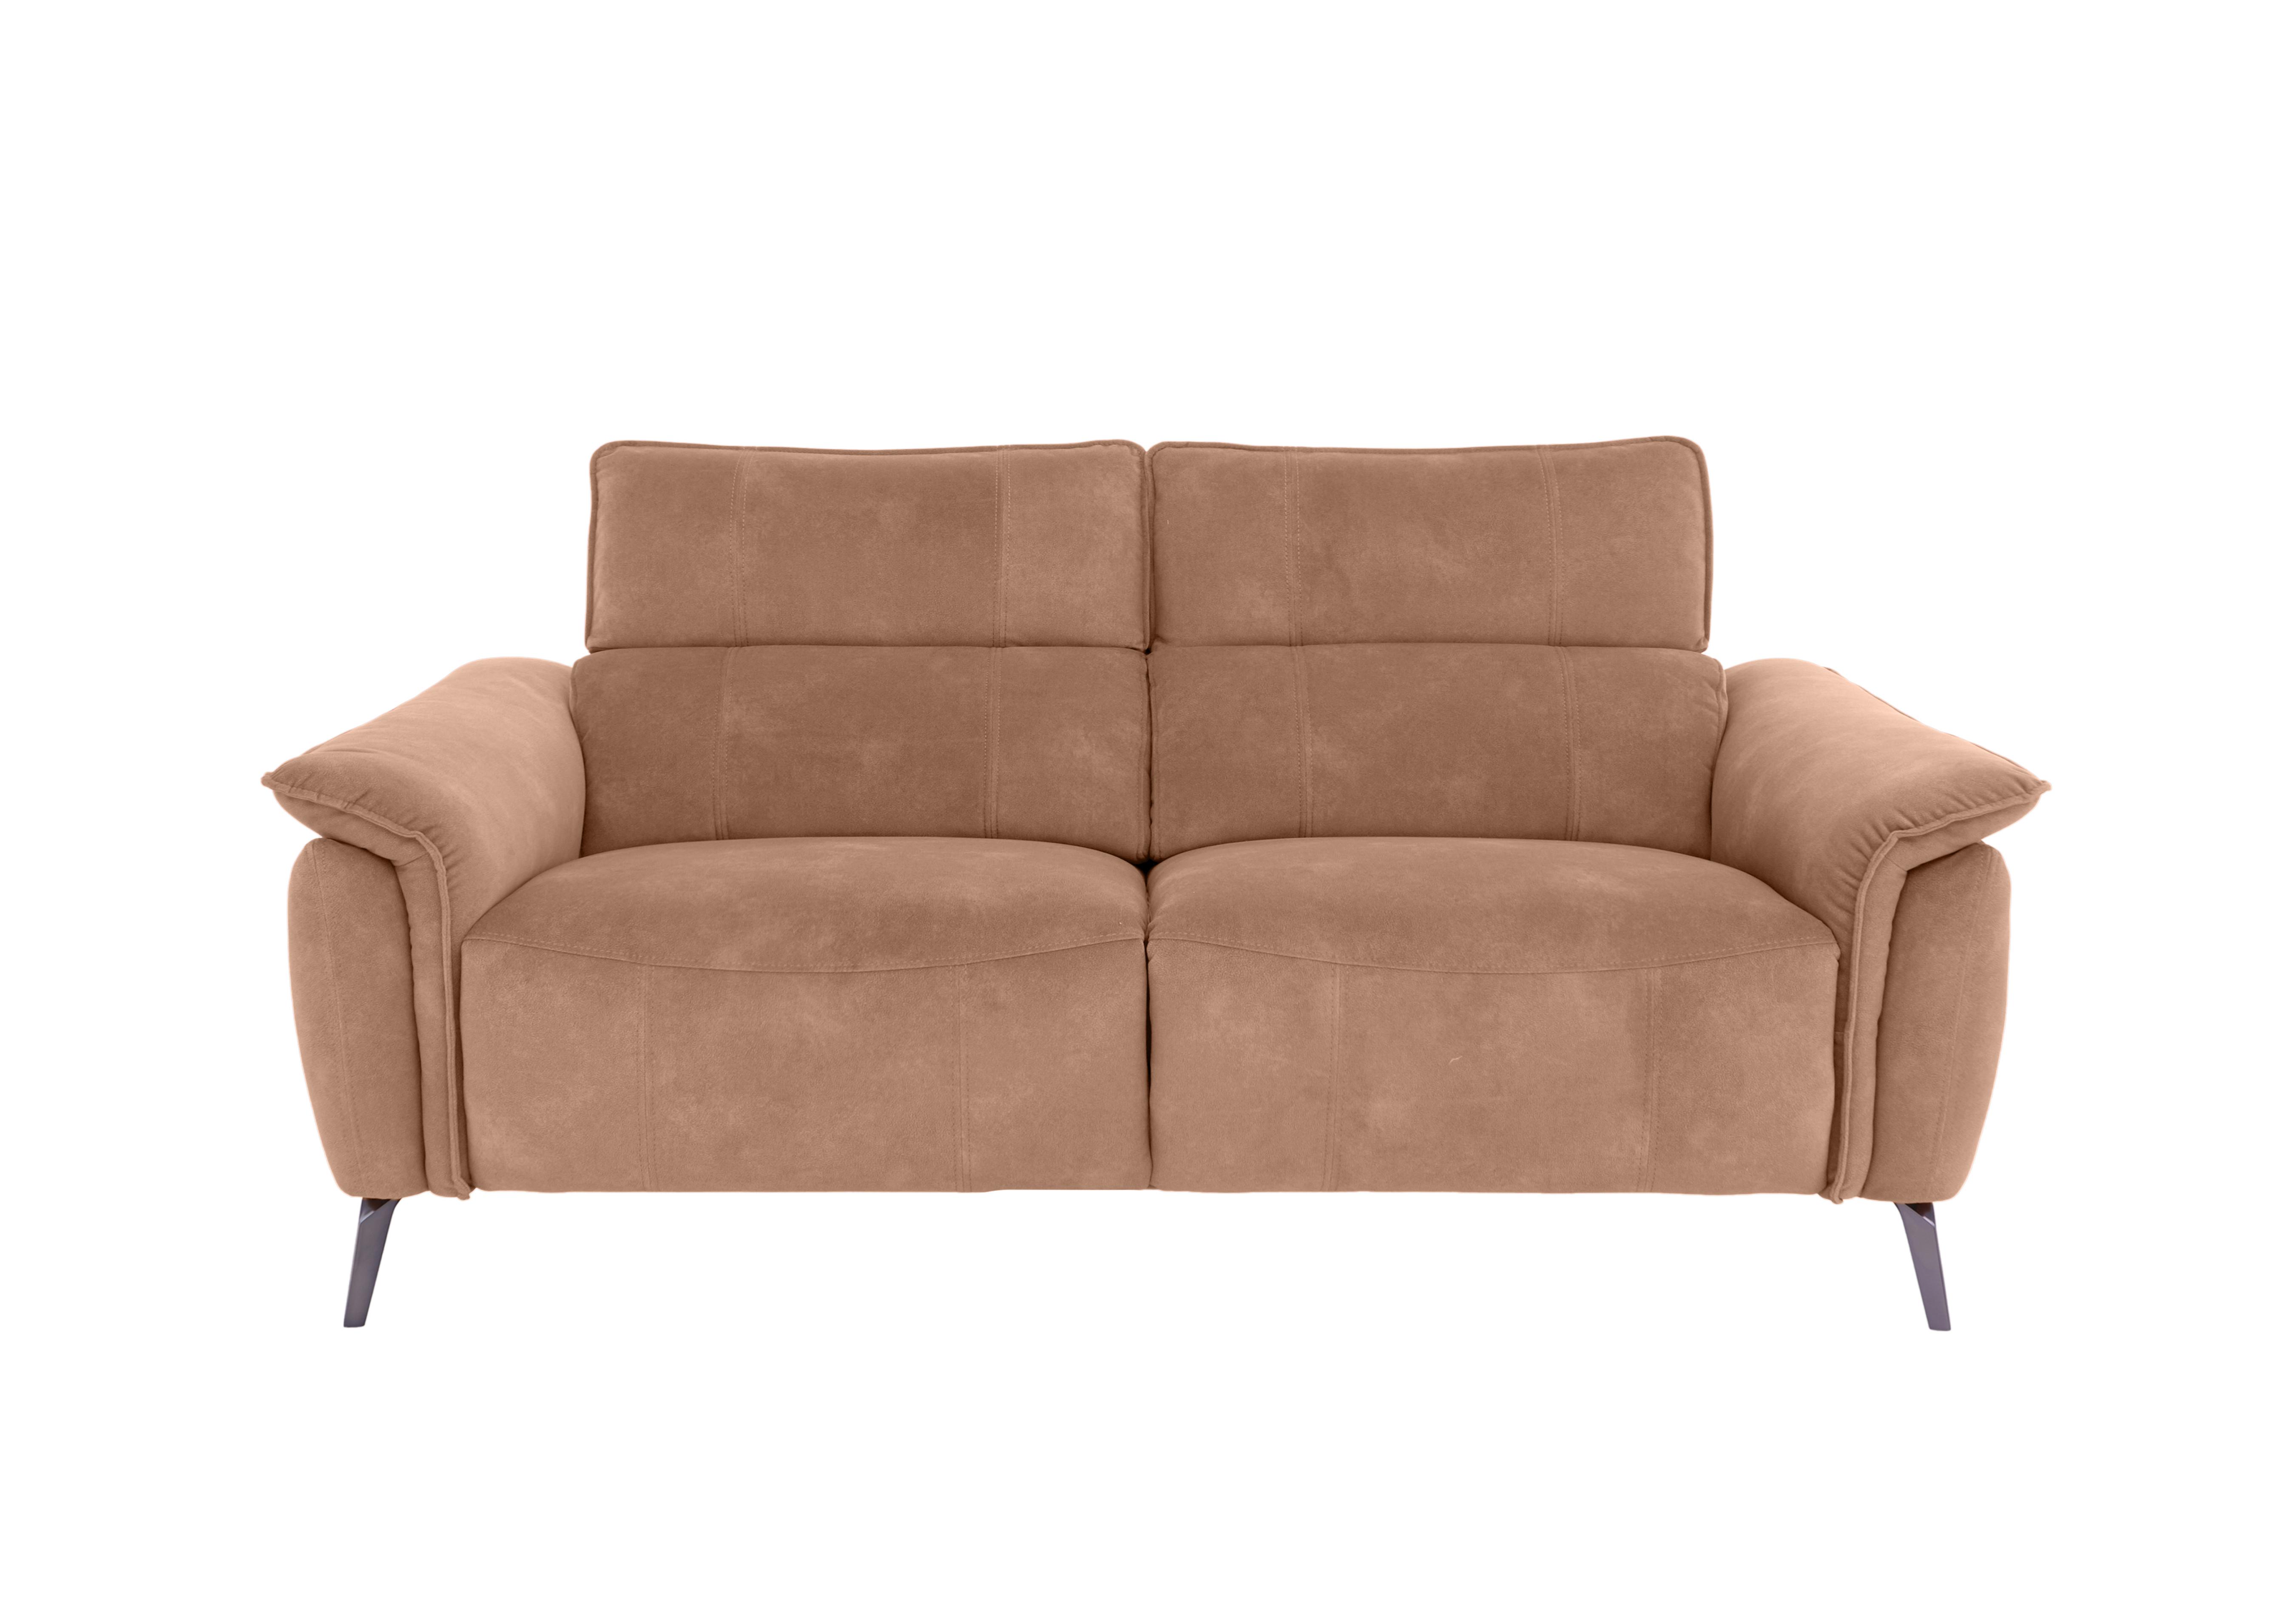 Jude 3 Seater Fabric Sofa in Sand Dexter 07 43507 on Furniture Village